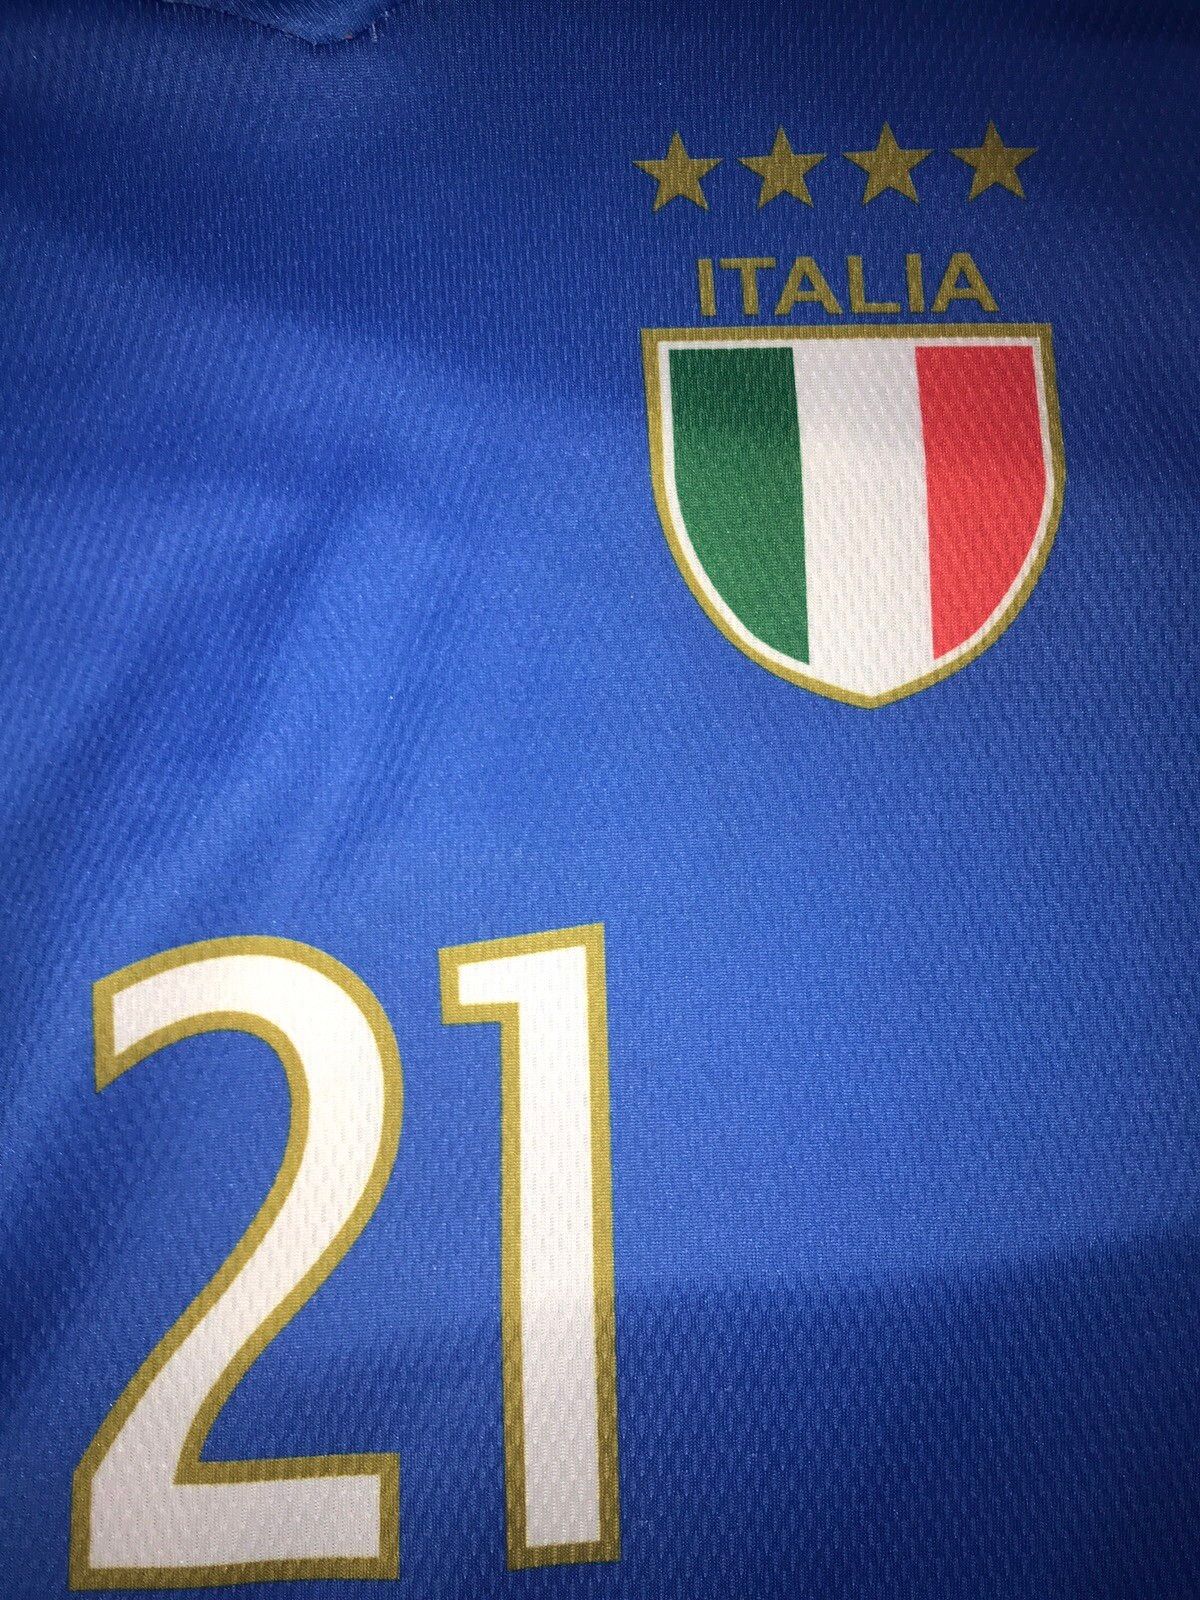 Soccer Jersey Italy soccer jersey Size US M / EU 48-50 / 2 - 2 Preview